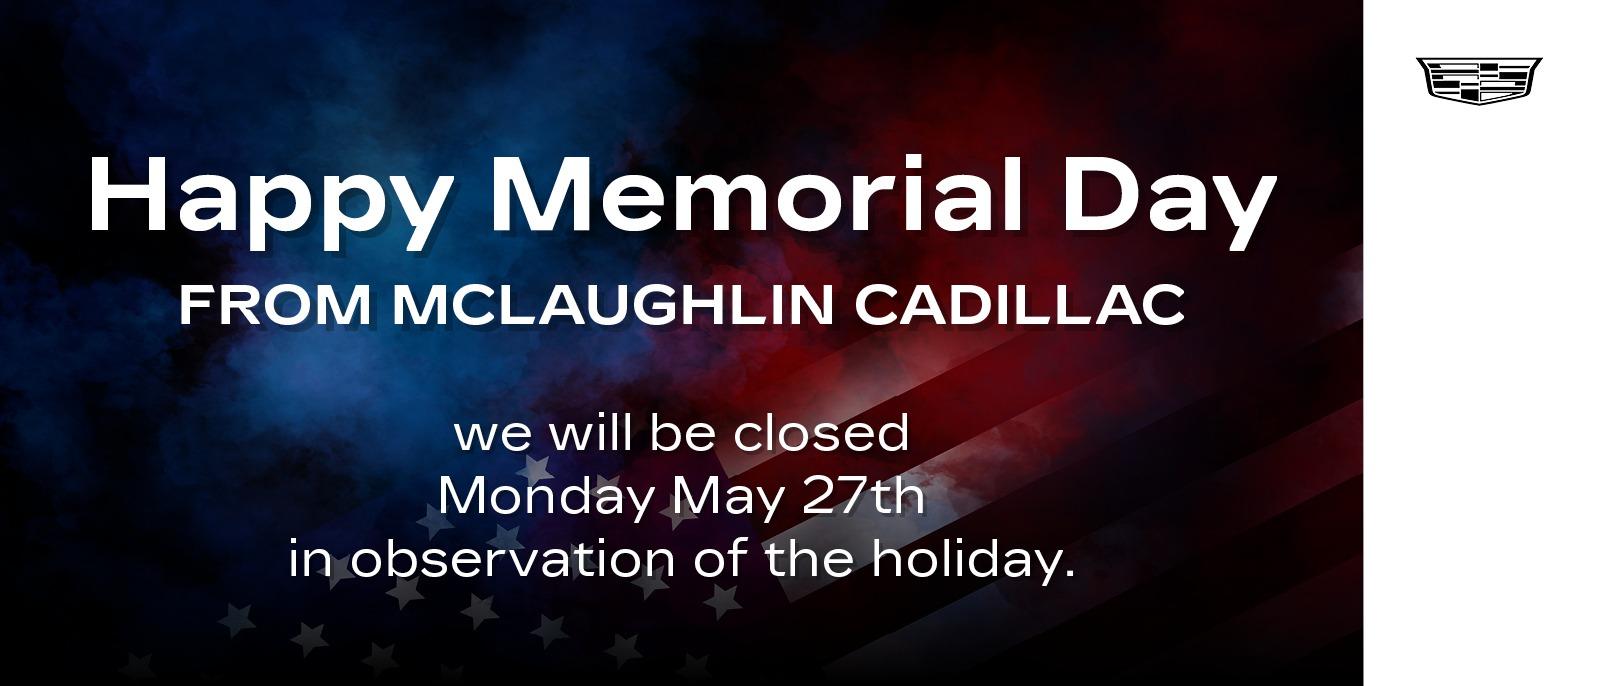 Happy Memorial Day, we will be closed on Monday May 27th in observation of the holiday